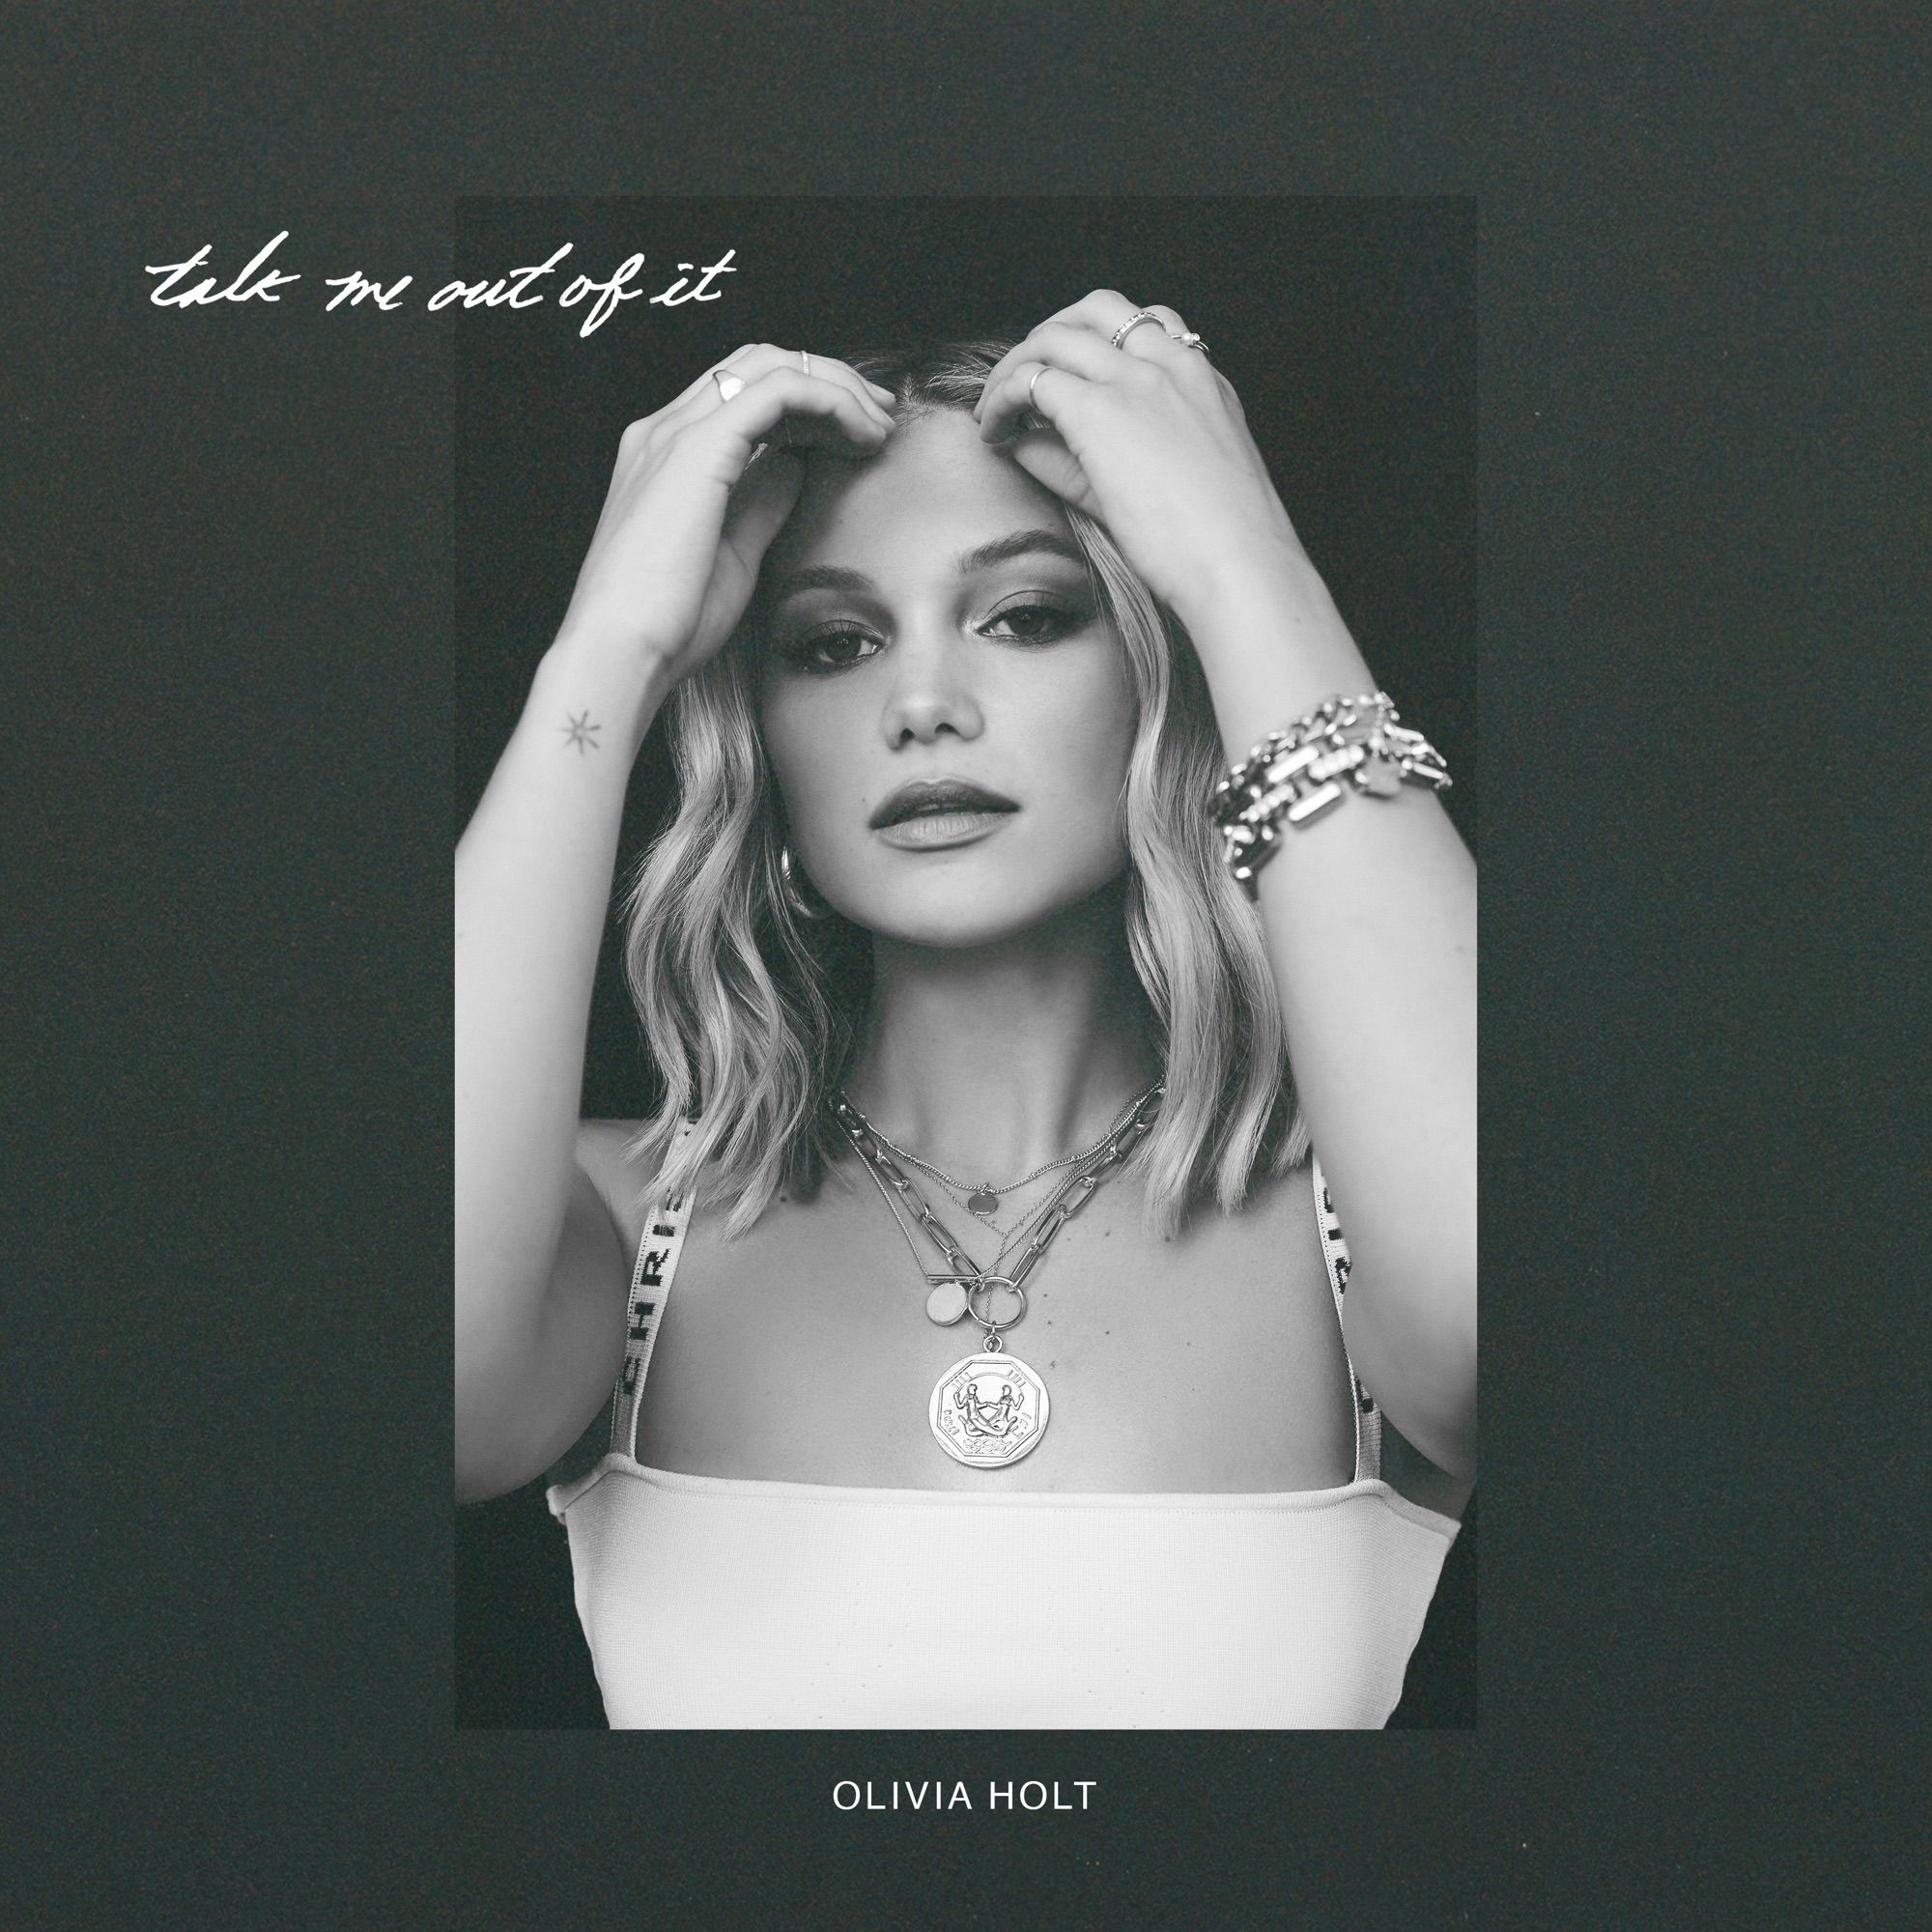 Olivia Holt - talk me out of it - Single